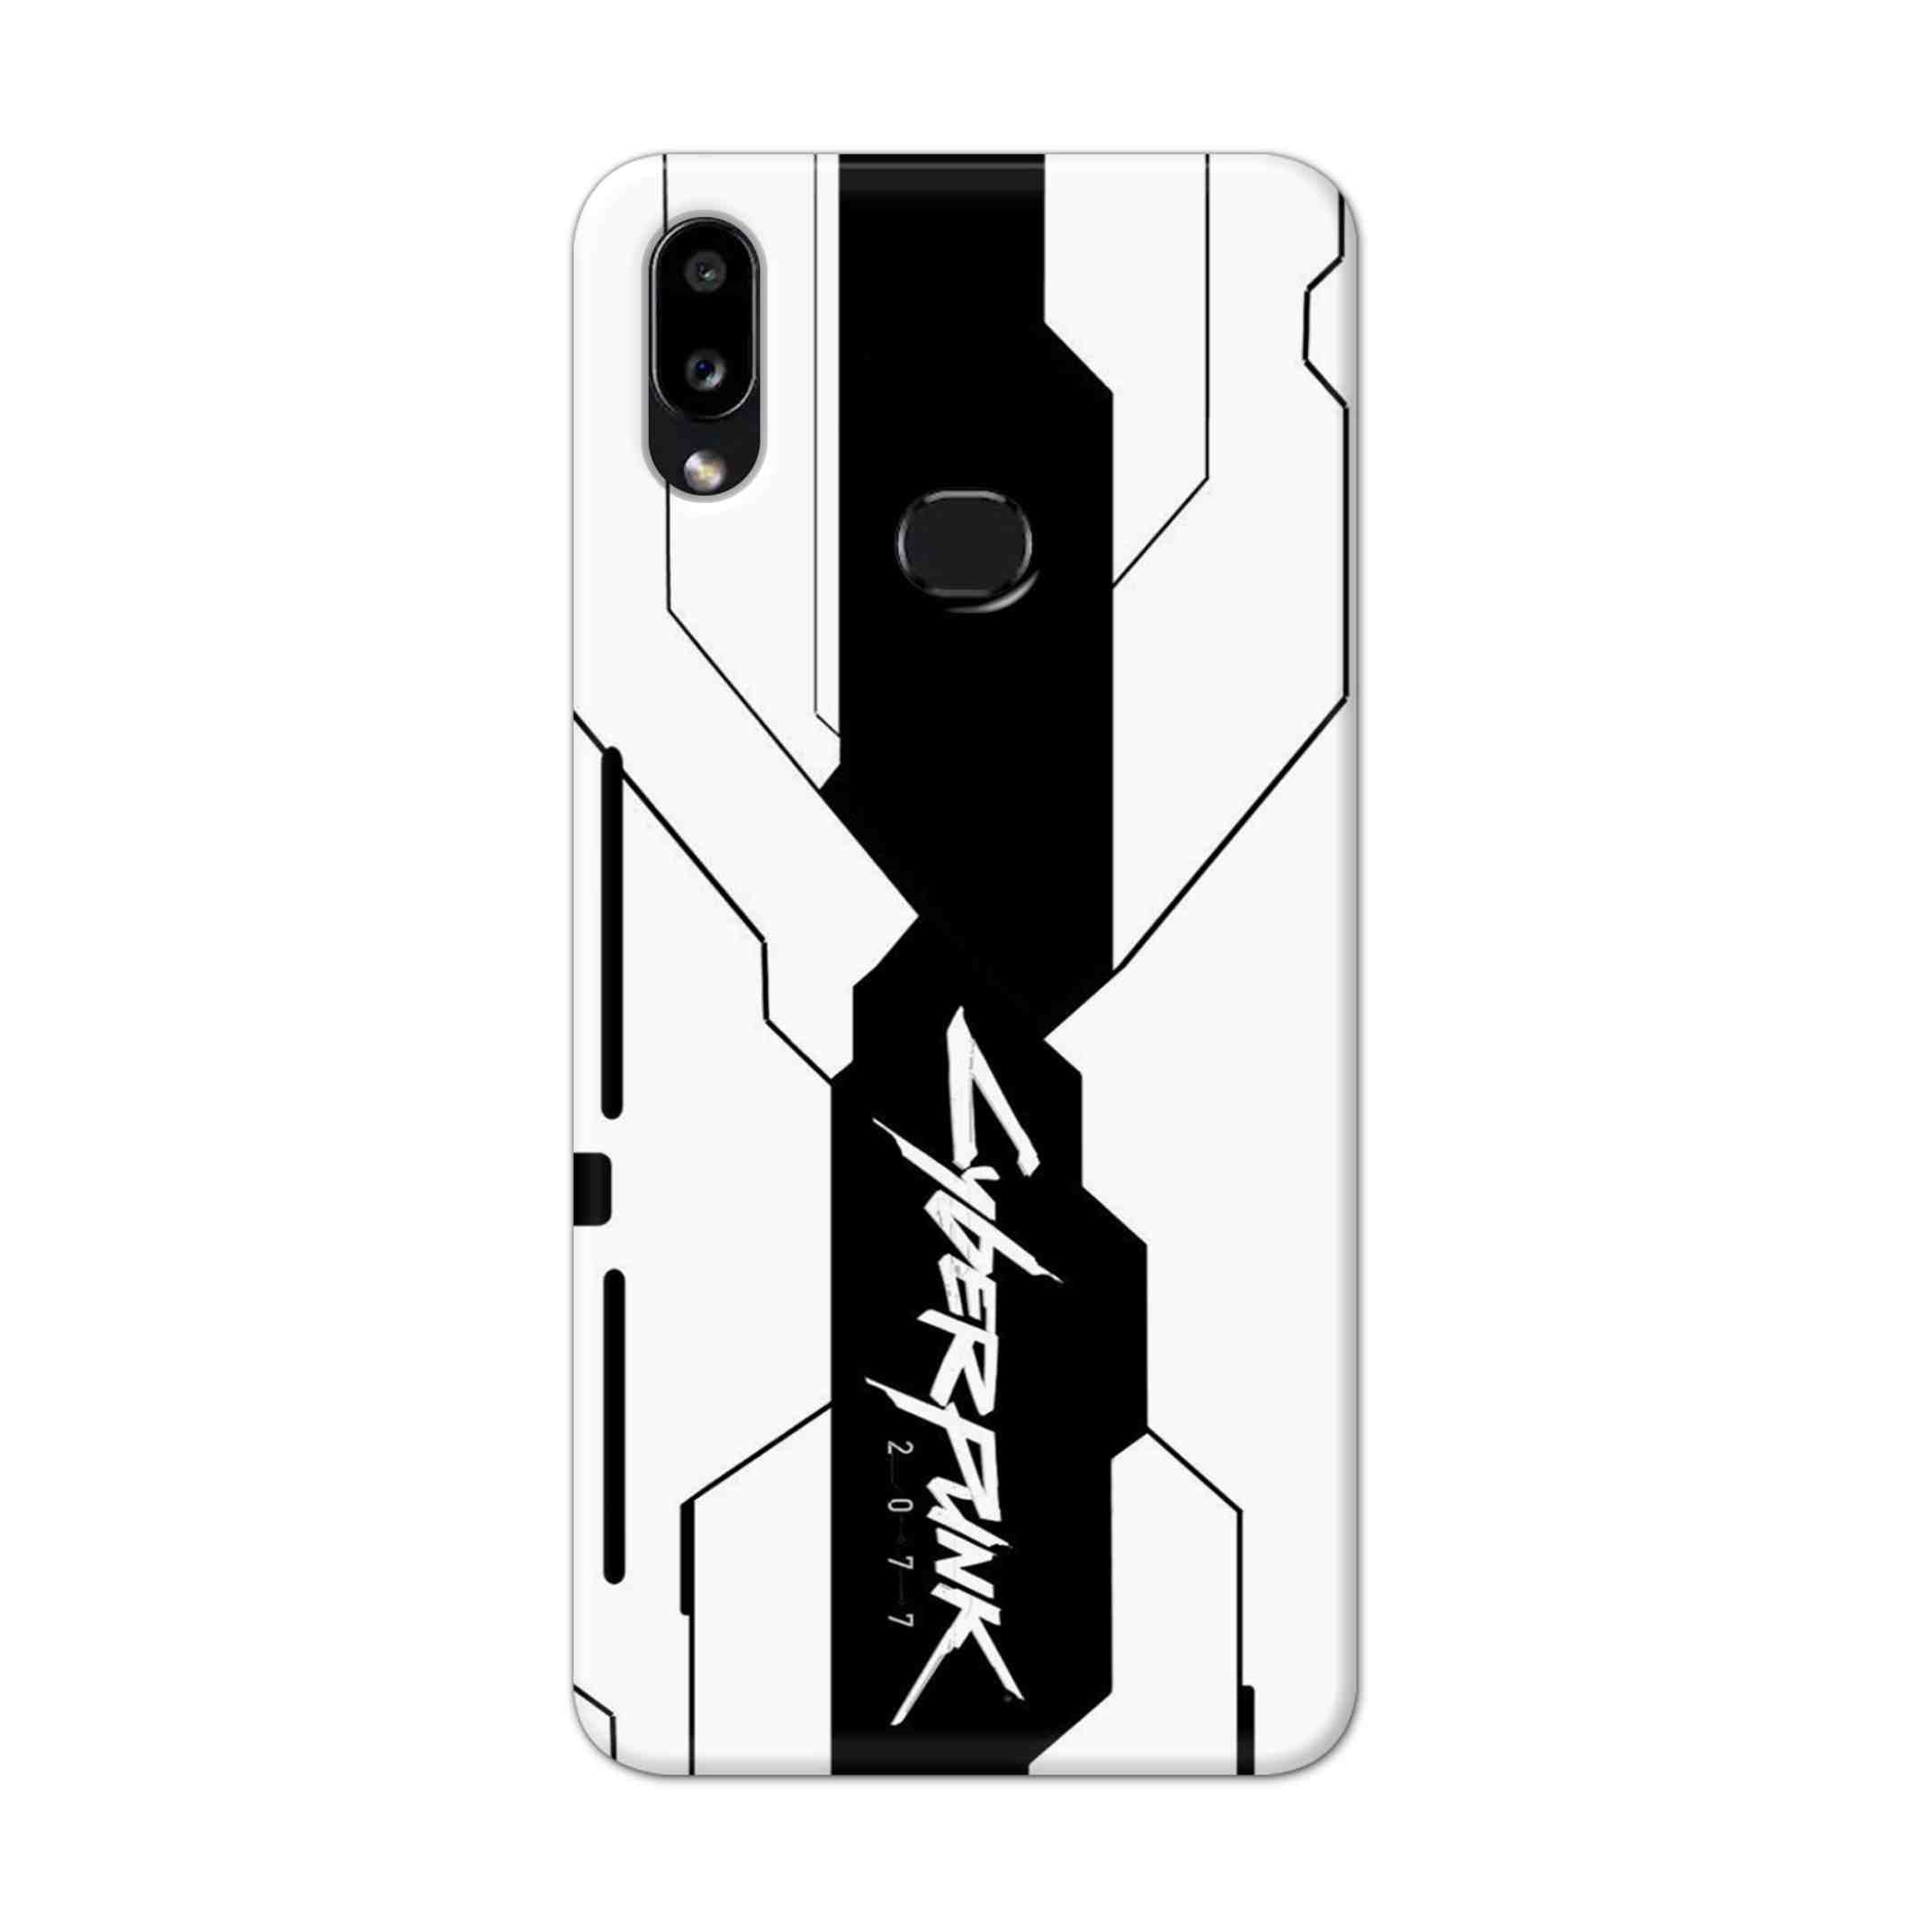 Buy Cyberpunk 2077 Hard Back Mobile Phone Case Cover For Samsung Galaxy M01s Online